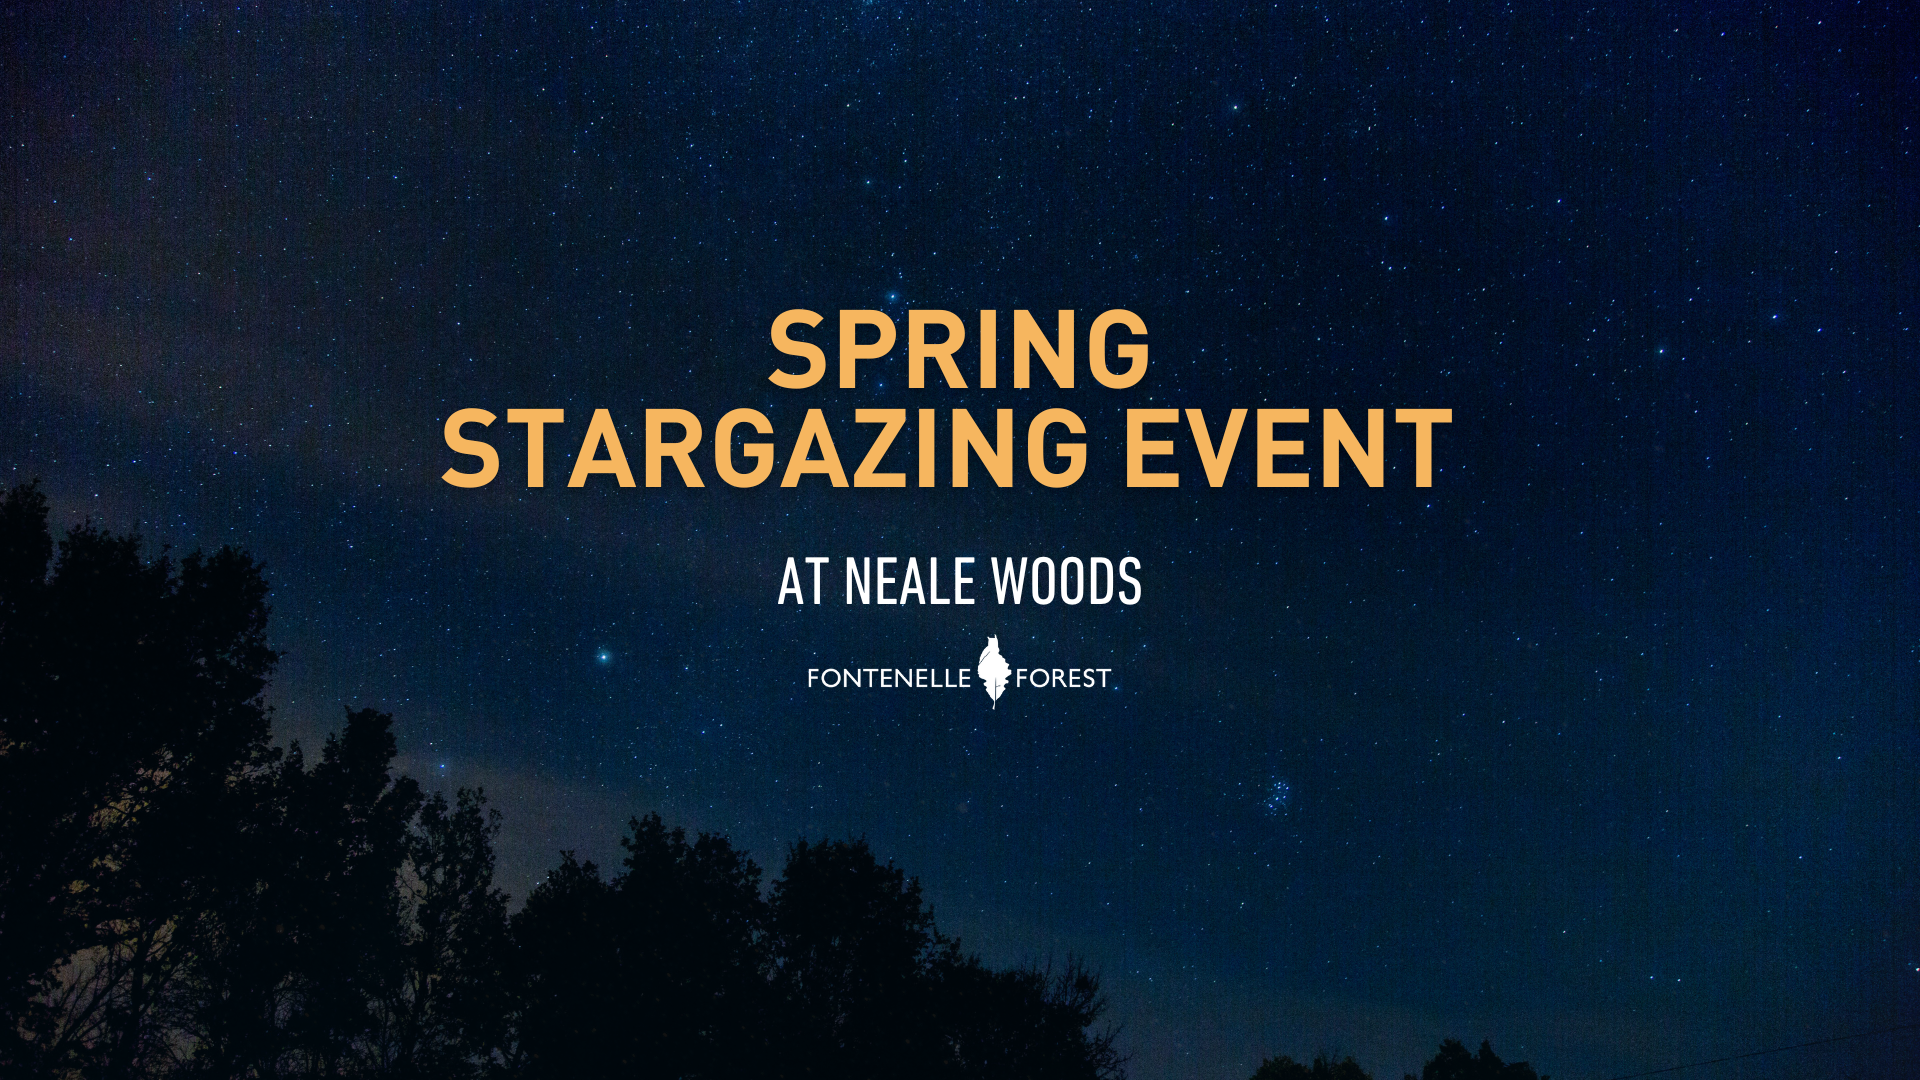 A picture of the starry night sky overlayed with the words "Spring Stargazing Event at Neale Woods" underscored by the Fontenelle Forest logo.